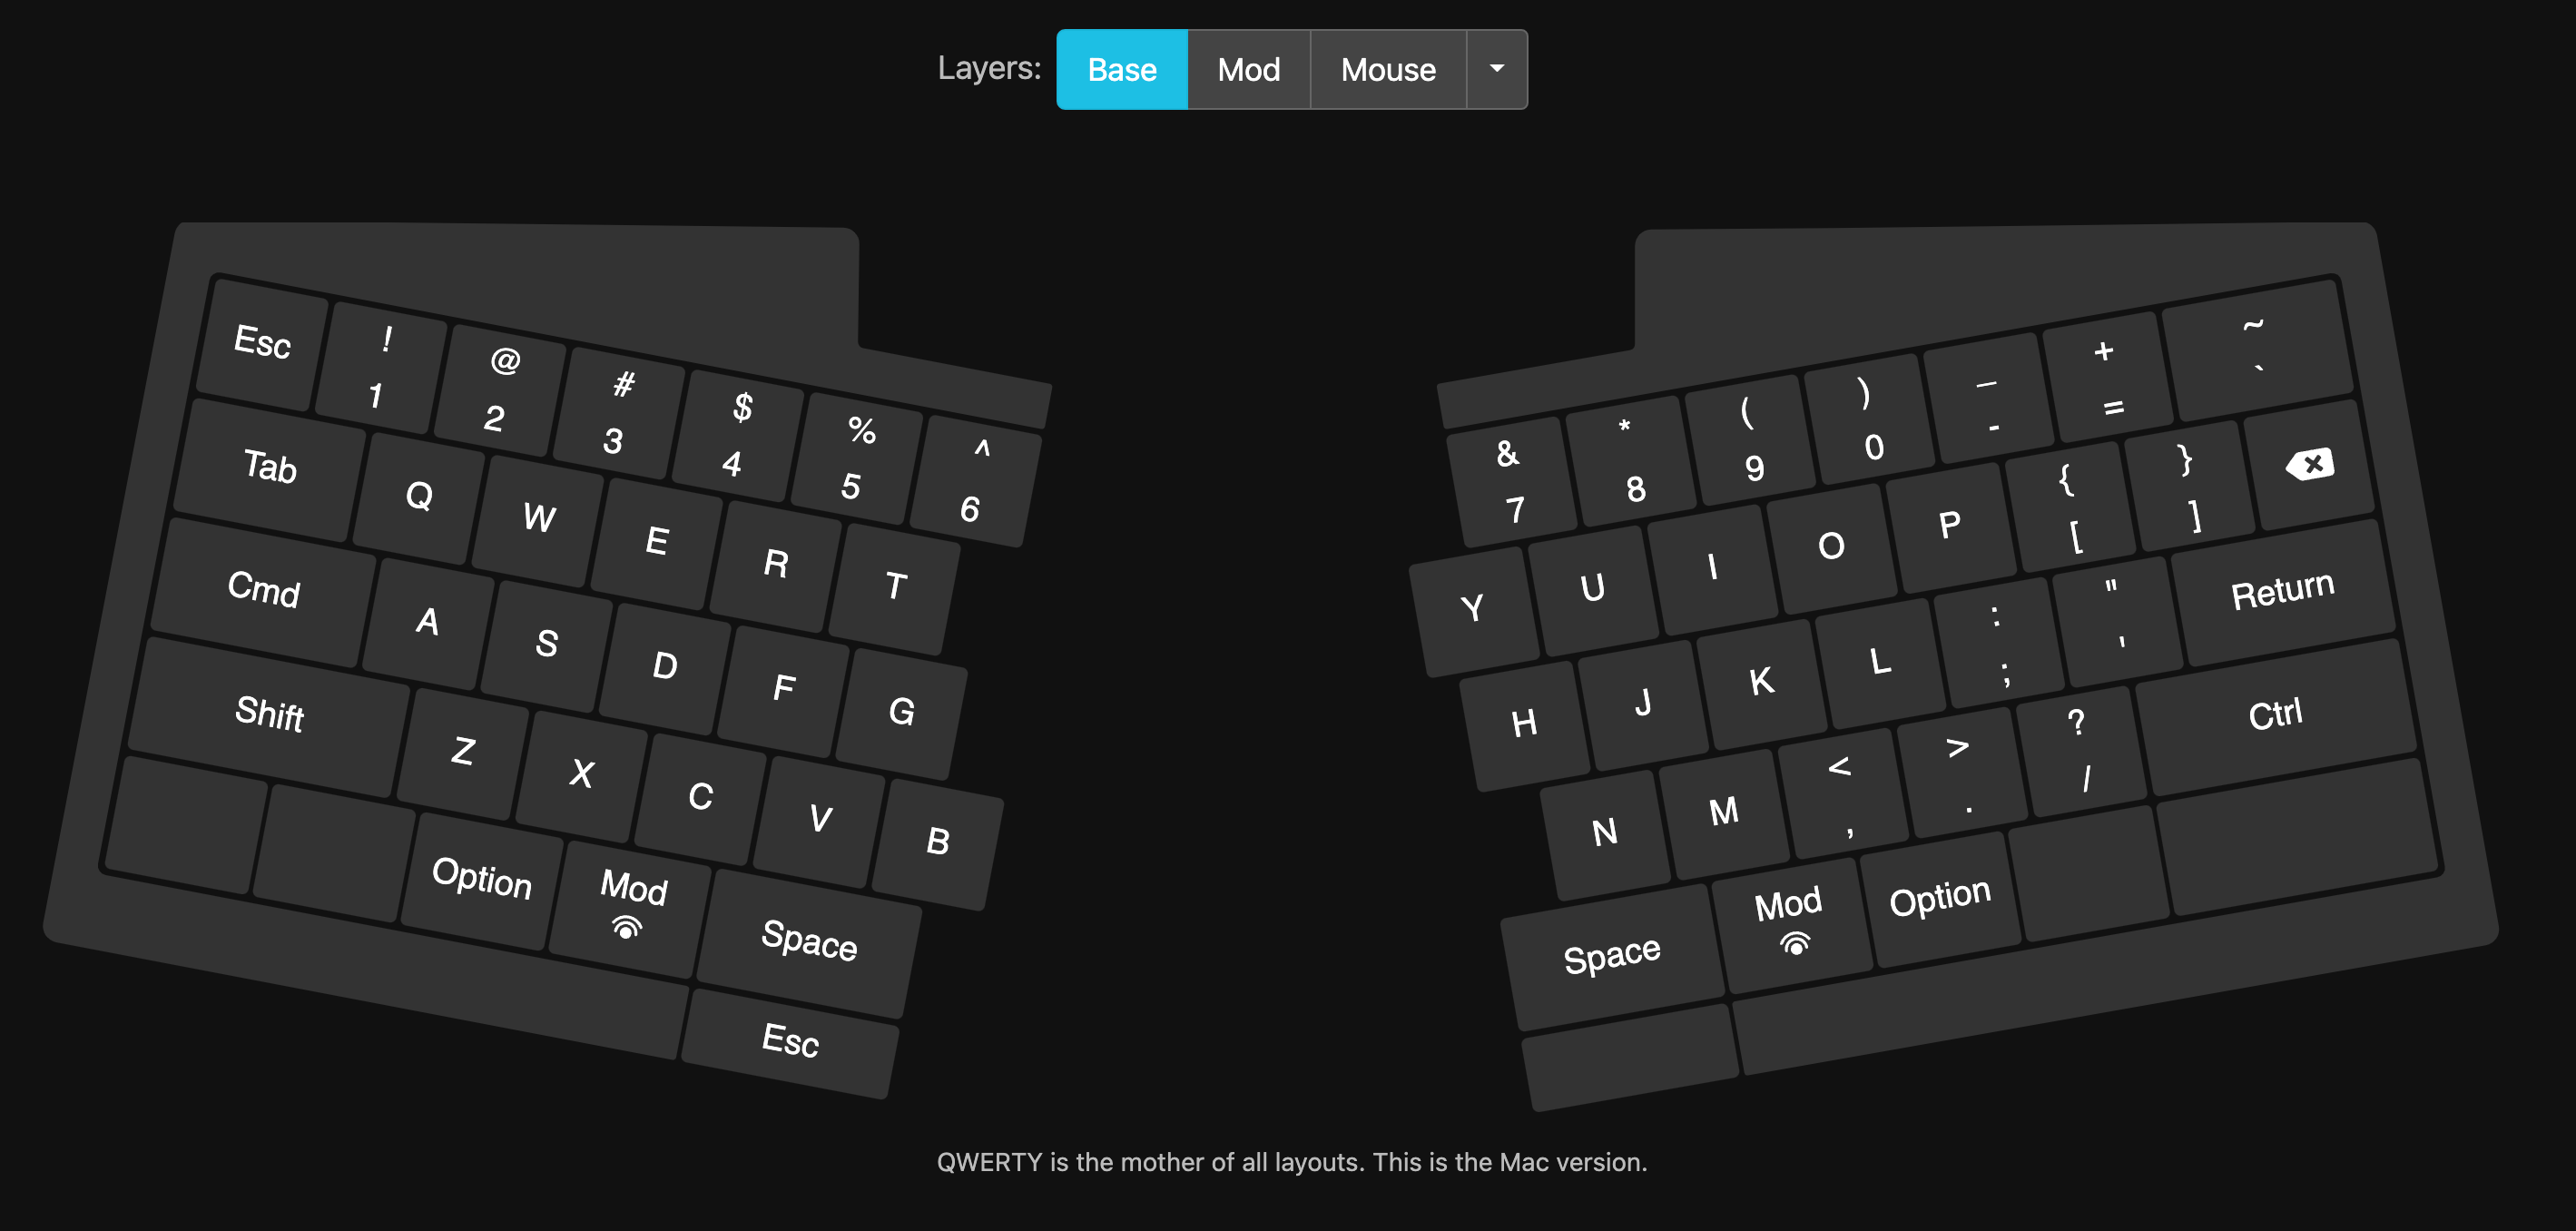 assets/2023-05-05--using-layer-with-built-in-macbook-keyboard/layer1.png